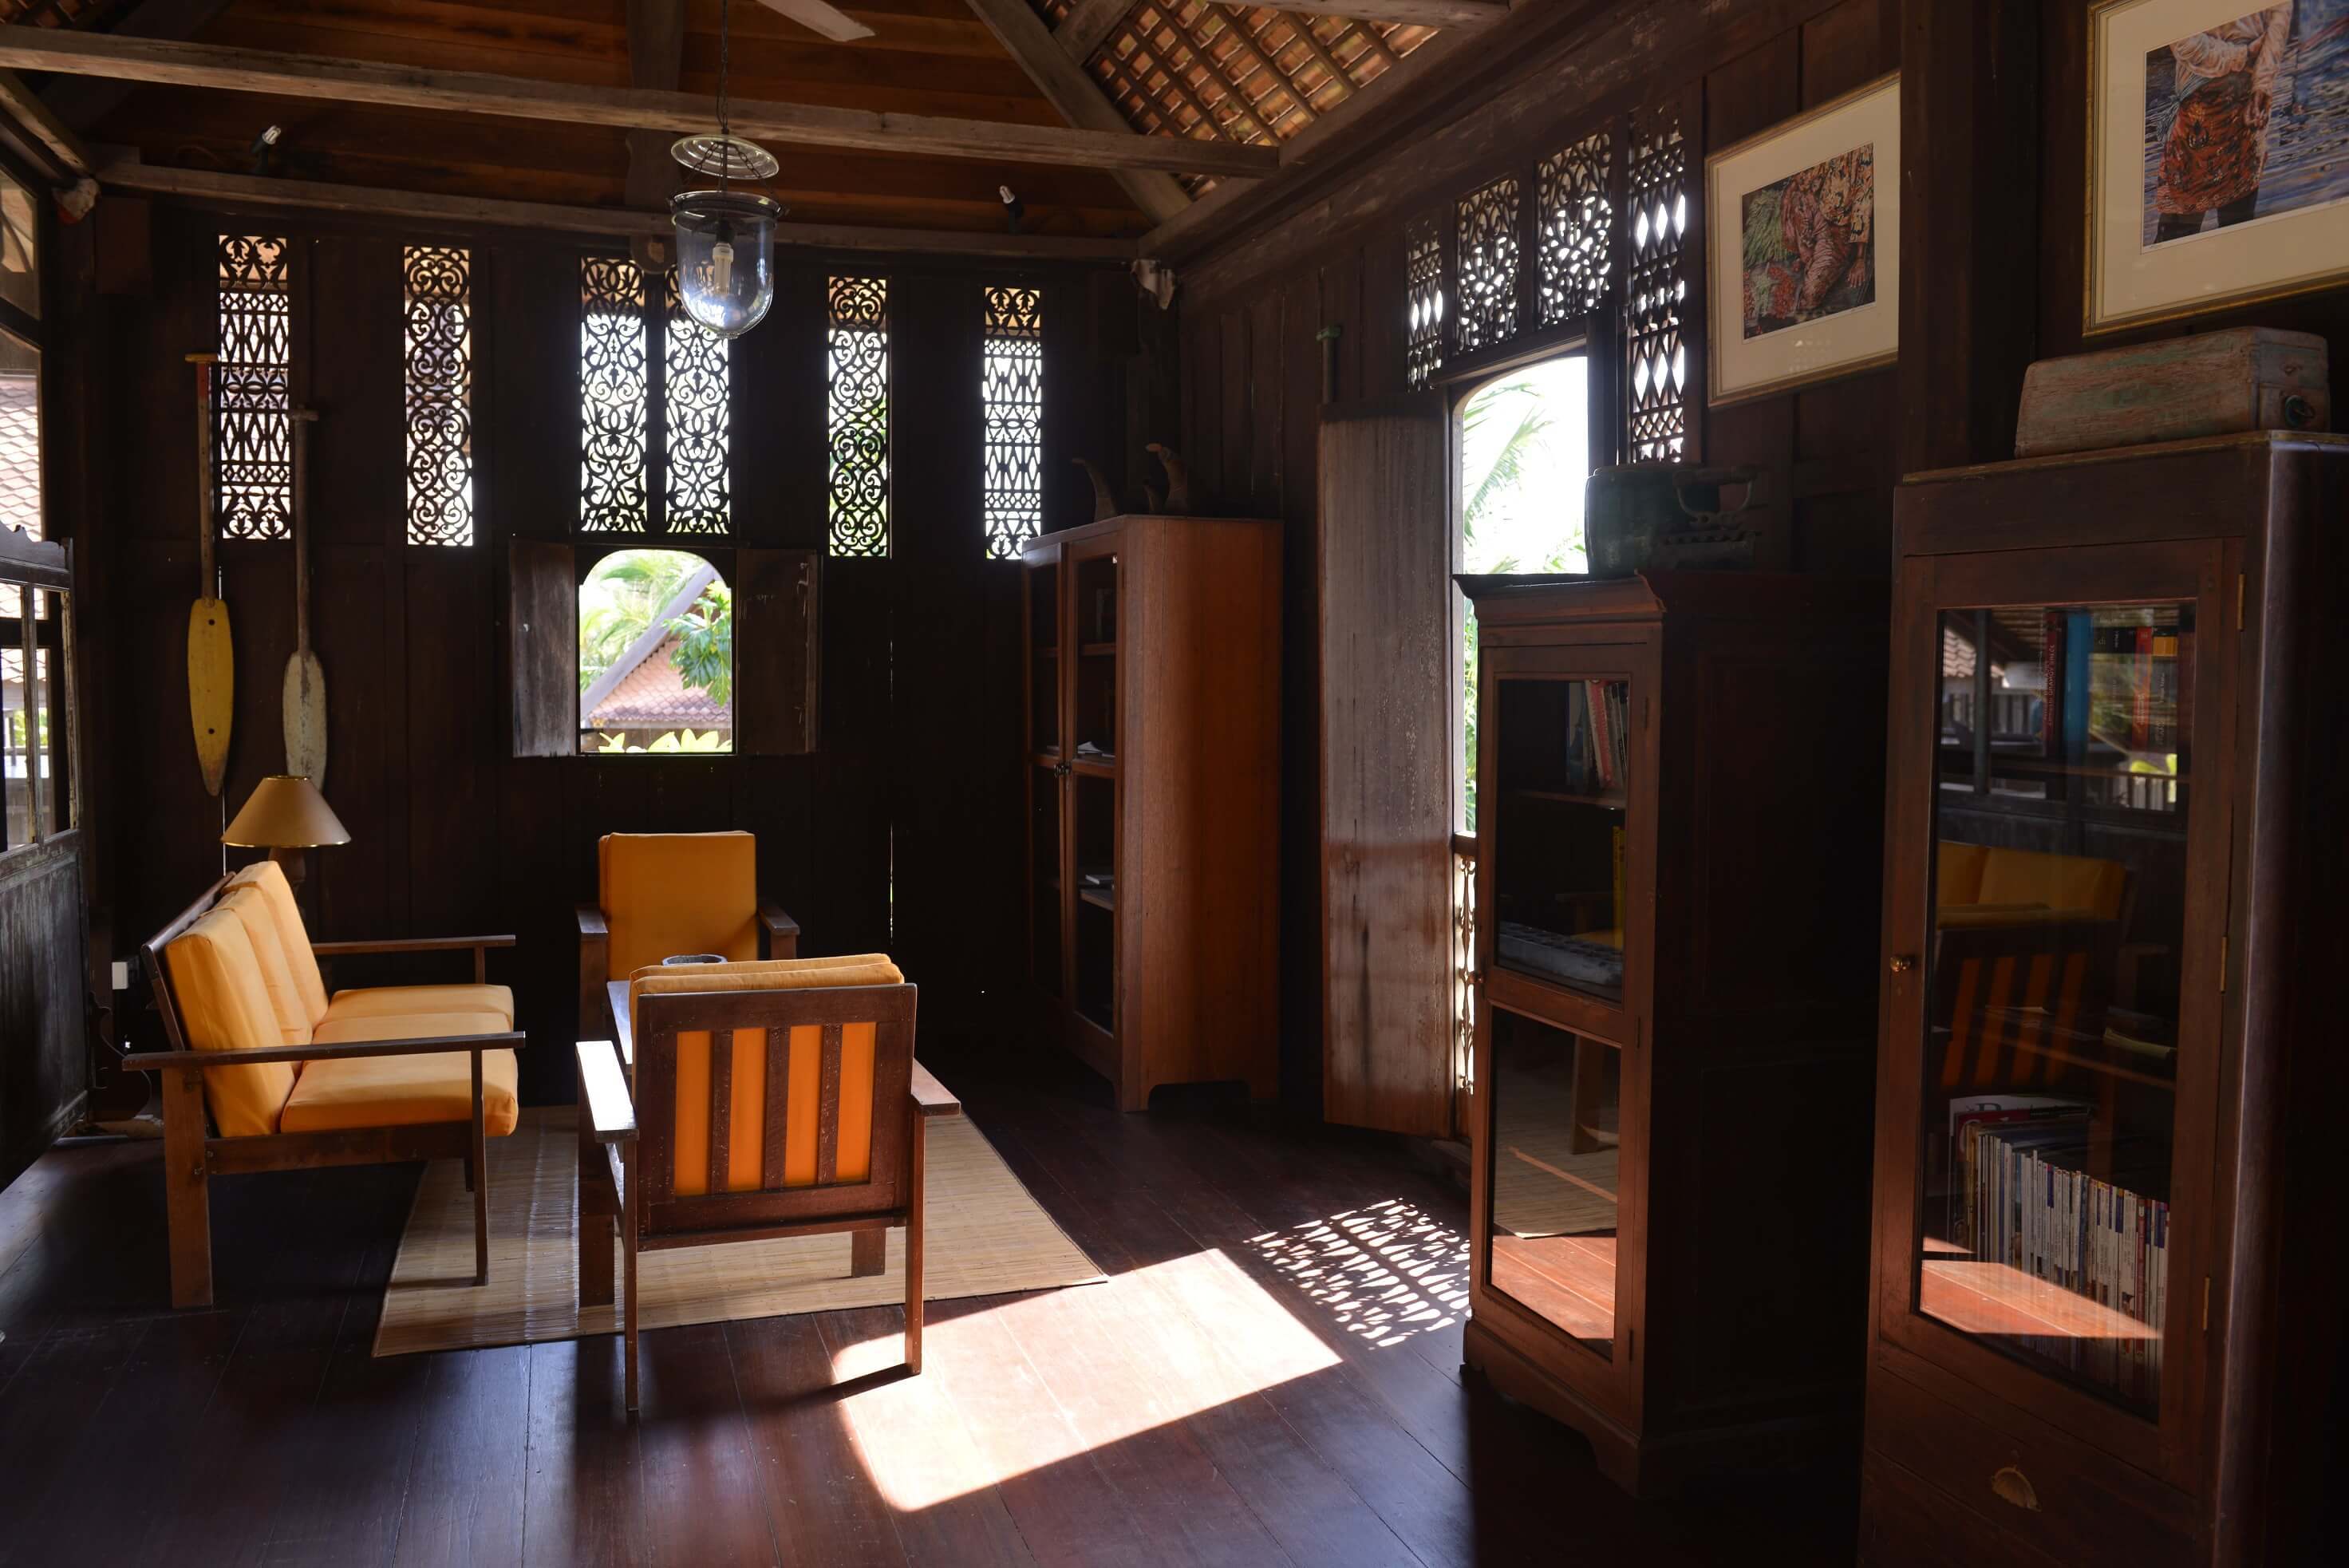 Seeing properties once owned by Malay royalty fall into disrepair and sometimes bulldozed to make way for modern developments, Alex sought a way to protect a slice of history through Terrapuri. Photo courtesy of Terrapuri Heritage Village